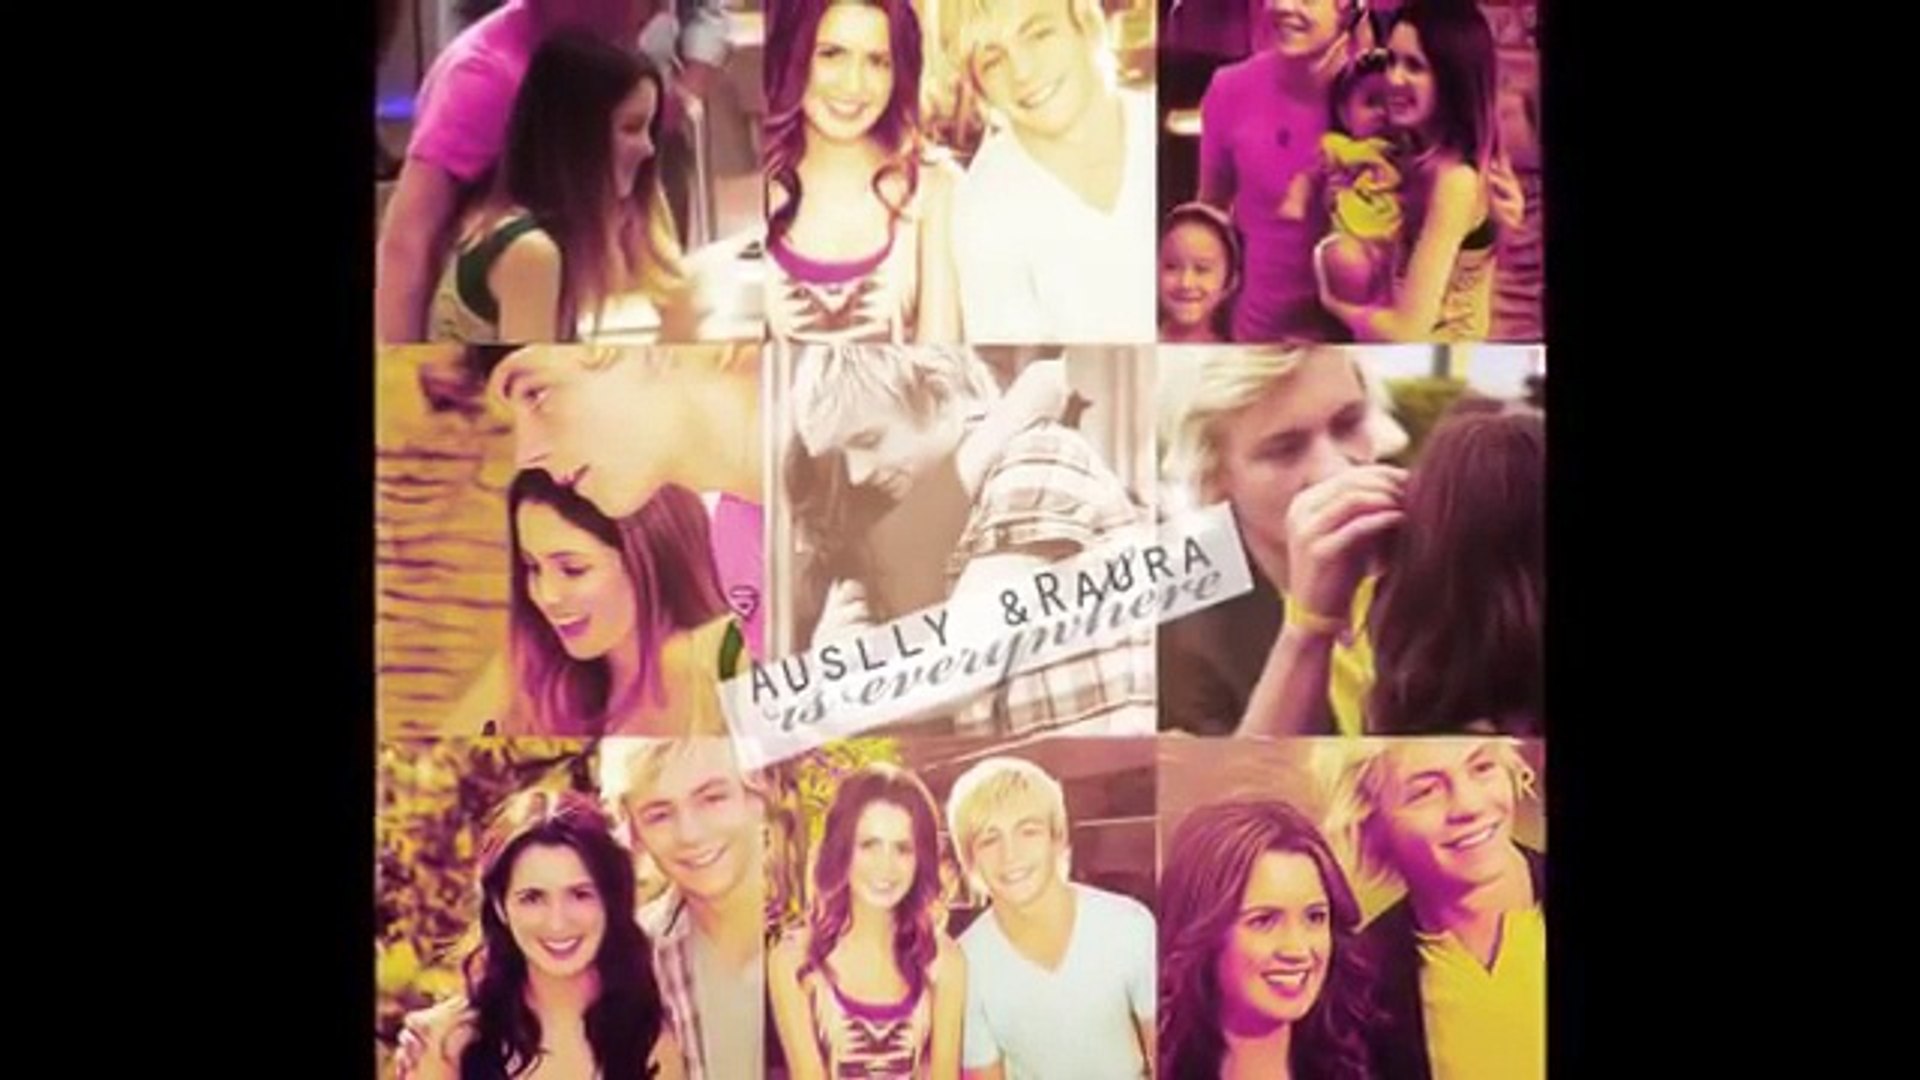 dick haynes recommends austin and ally kissing pic